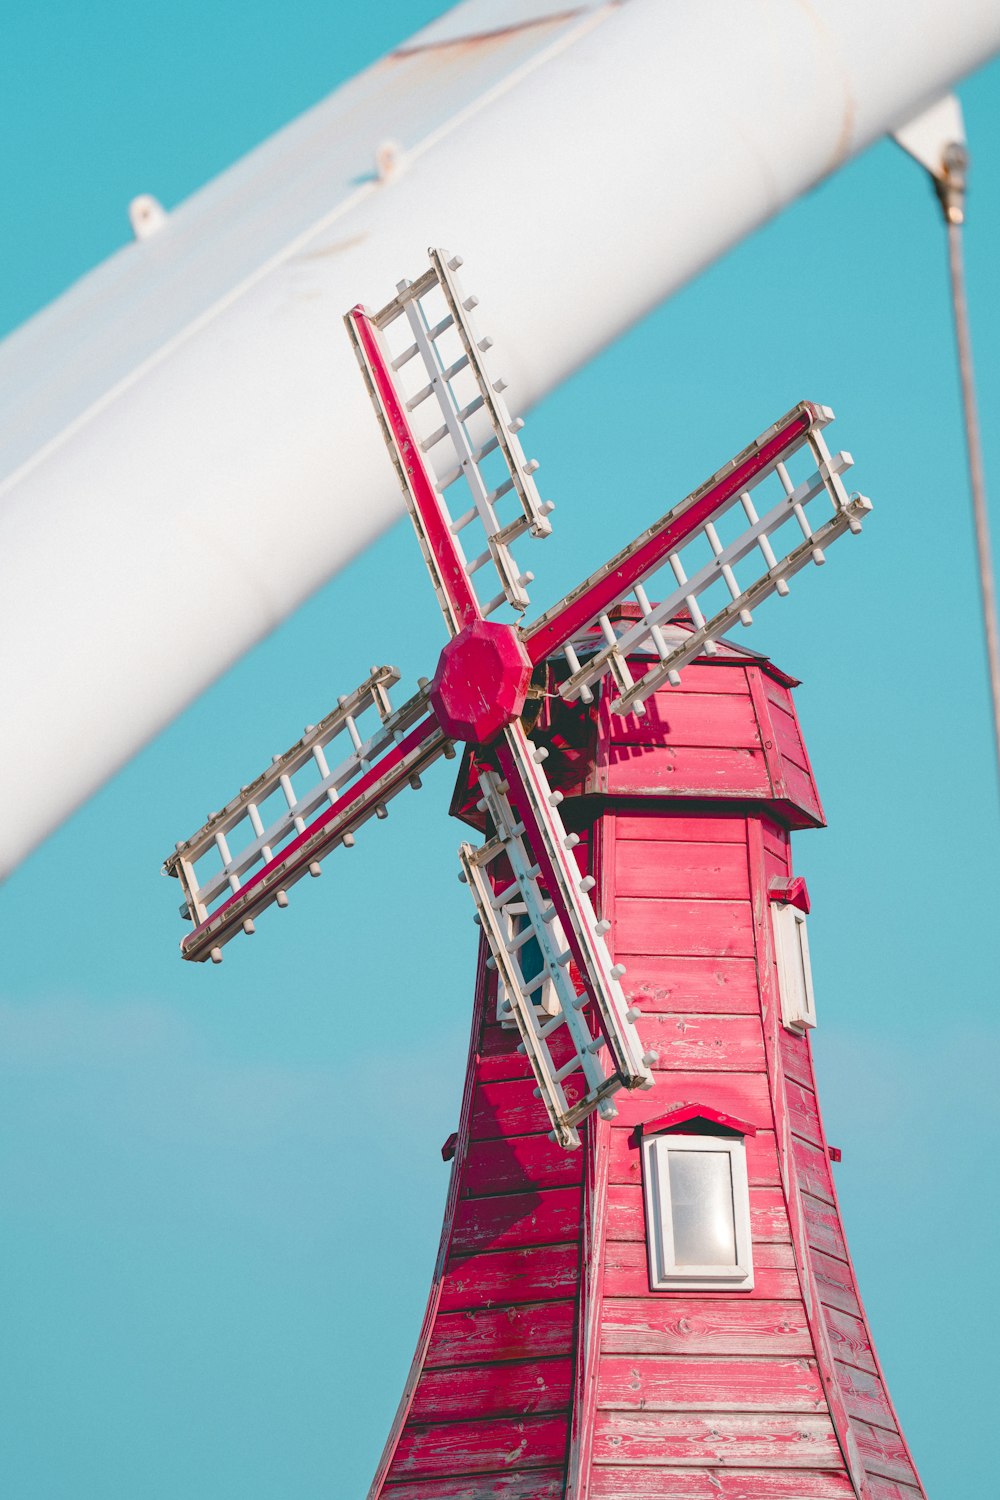 a windmill with a red roof and a white roof